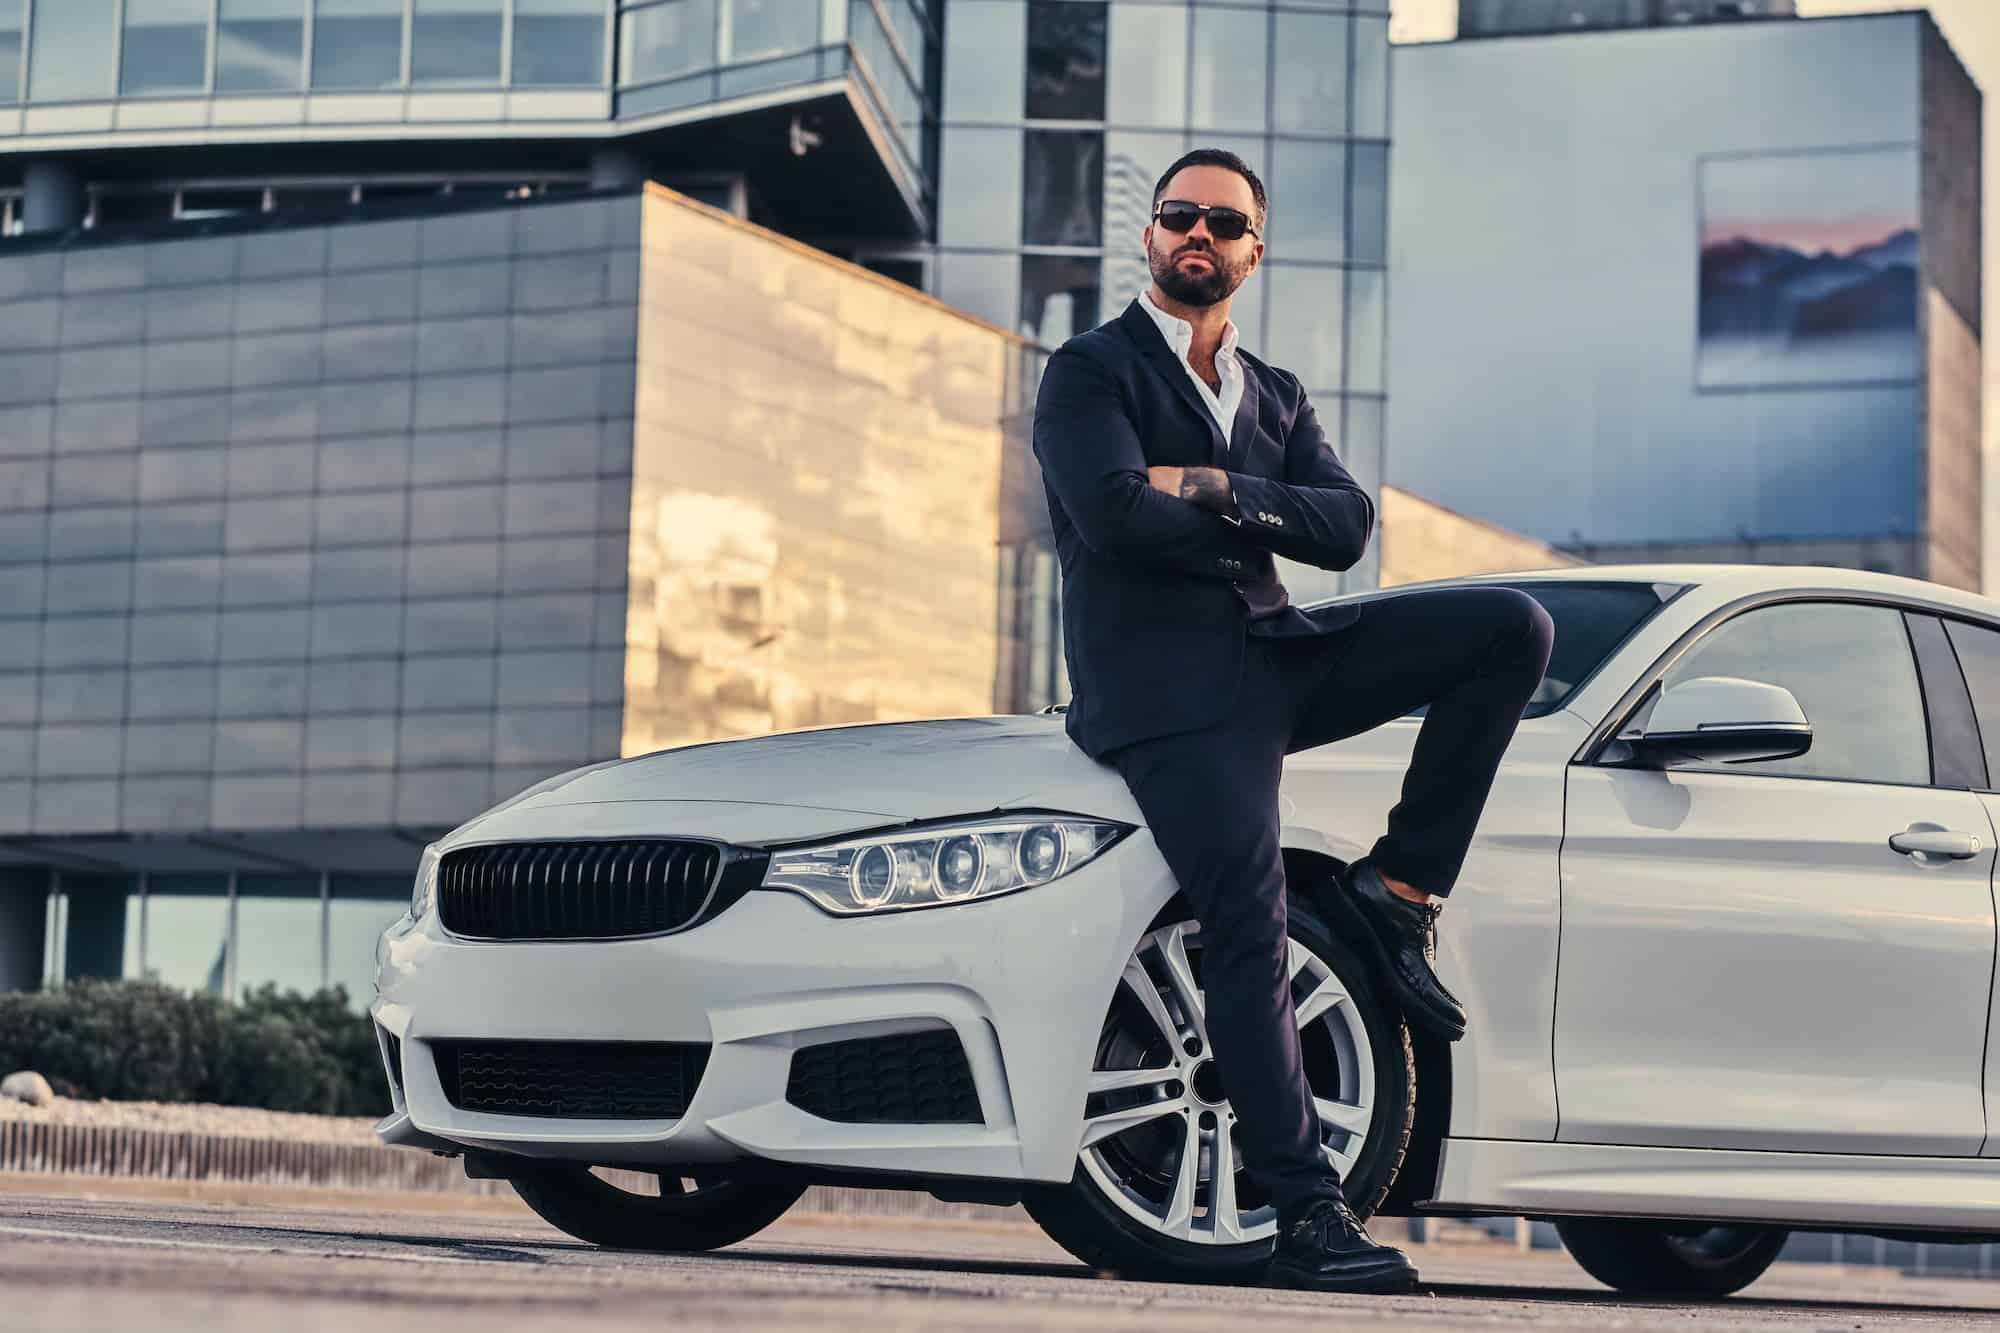 Bearded male in sunglasses dressed in a black suit sitting on luxury car against a skyscraper.